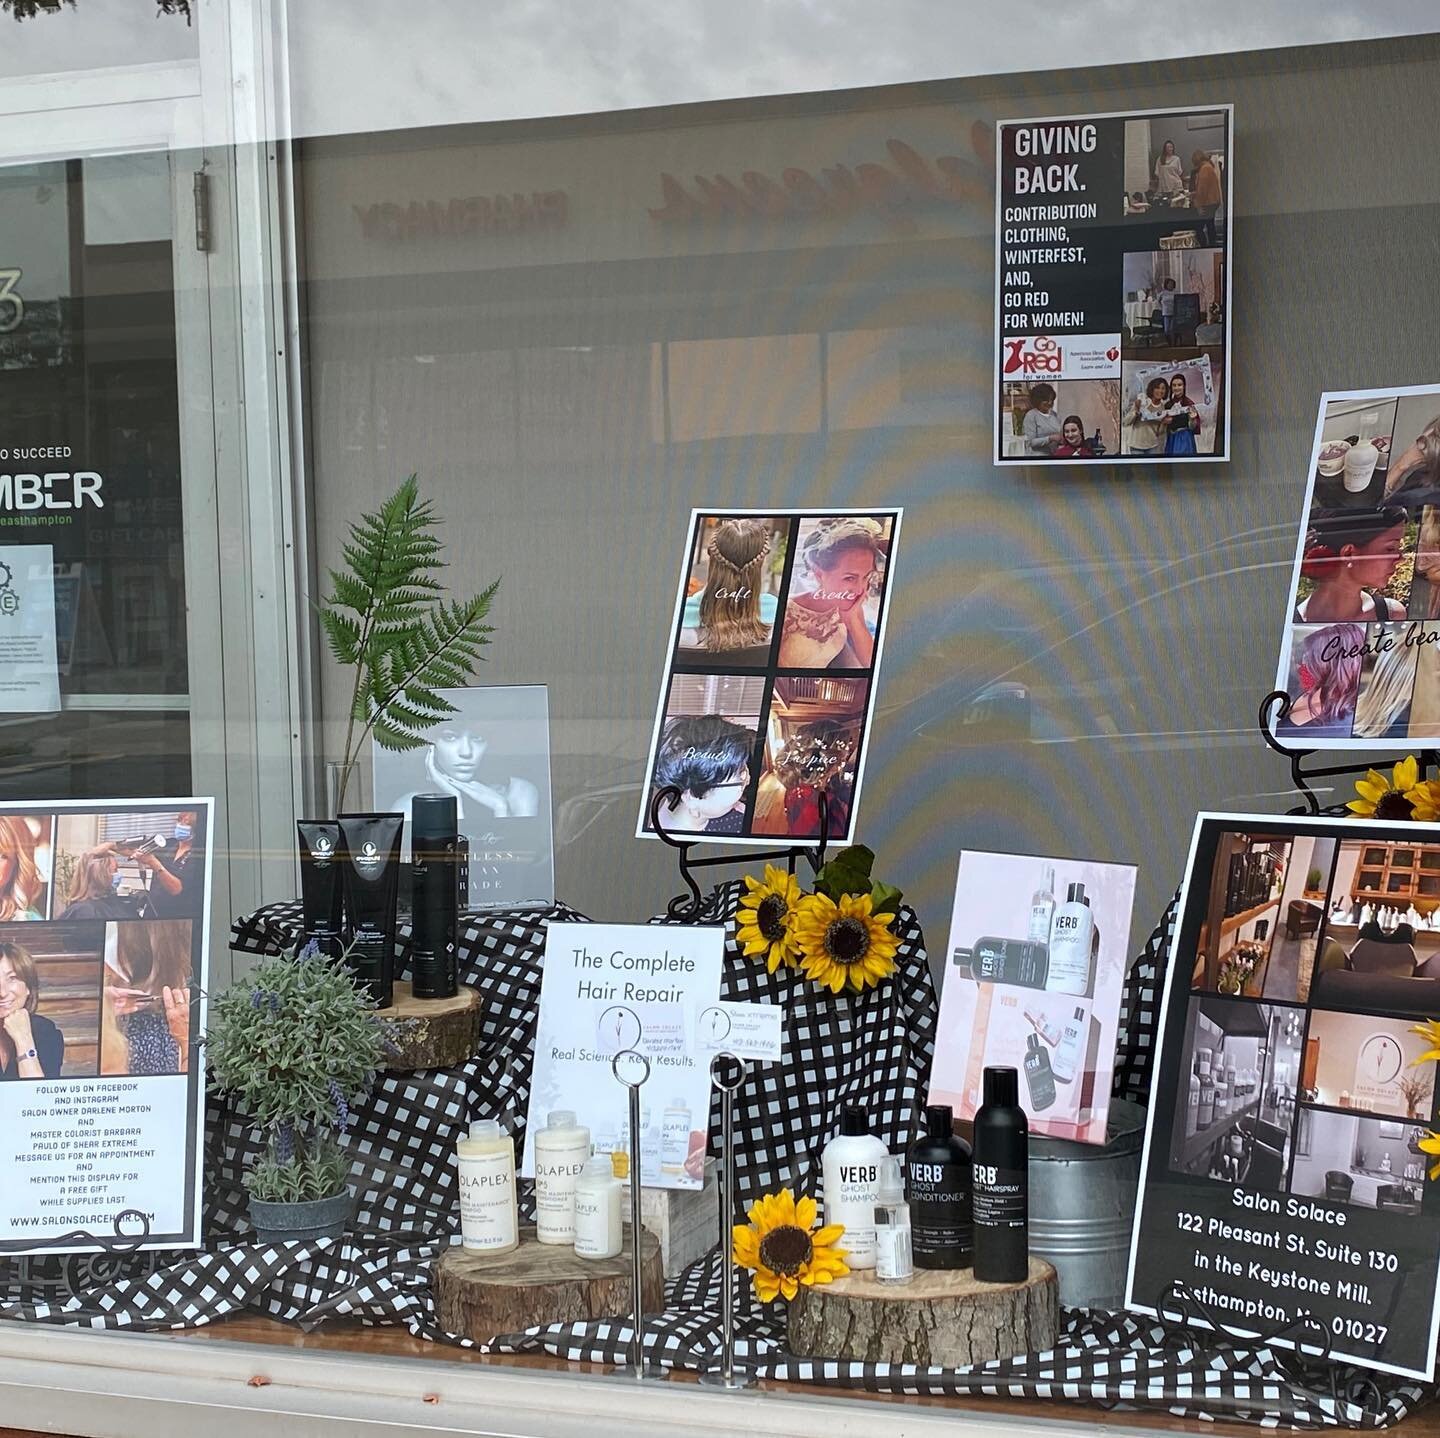 I had a great time creating this window display at the Easthampton Chamber of Commerce. What do you think? #greatereasthamptonchamberofcommerce #easthamptonma #smallbusinessowner #safesalon #smallsalon #acceptingnewclients #dowhatyoulovelovewhatyoudo